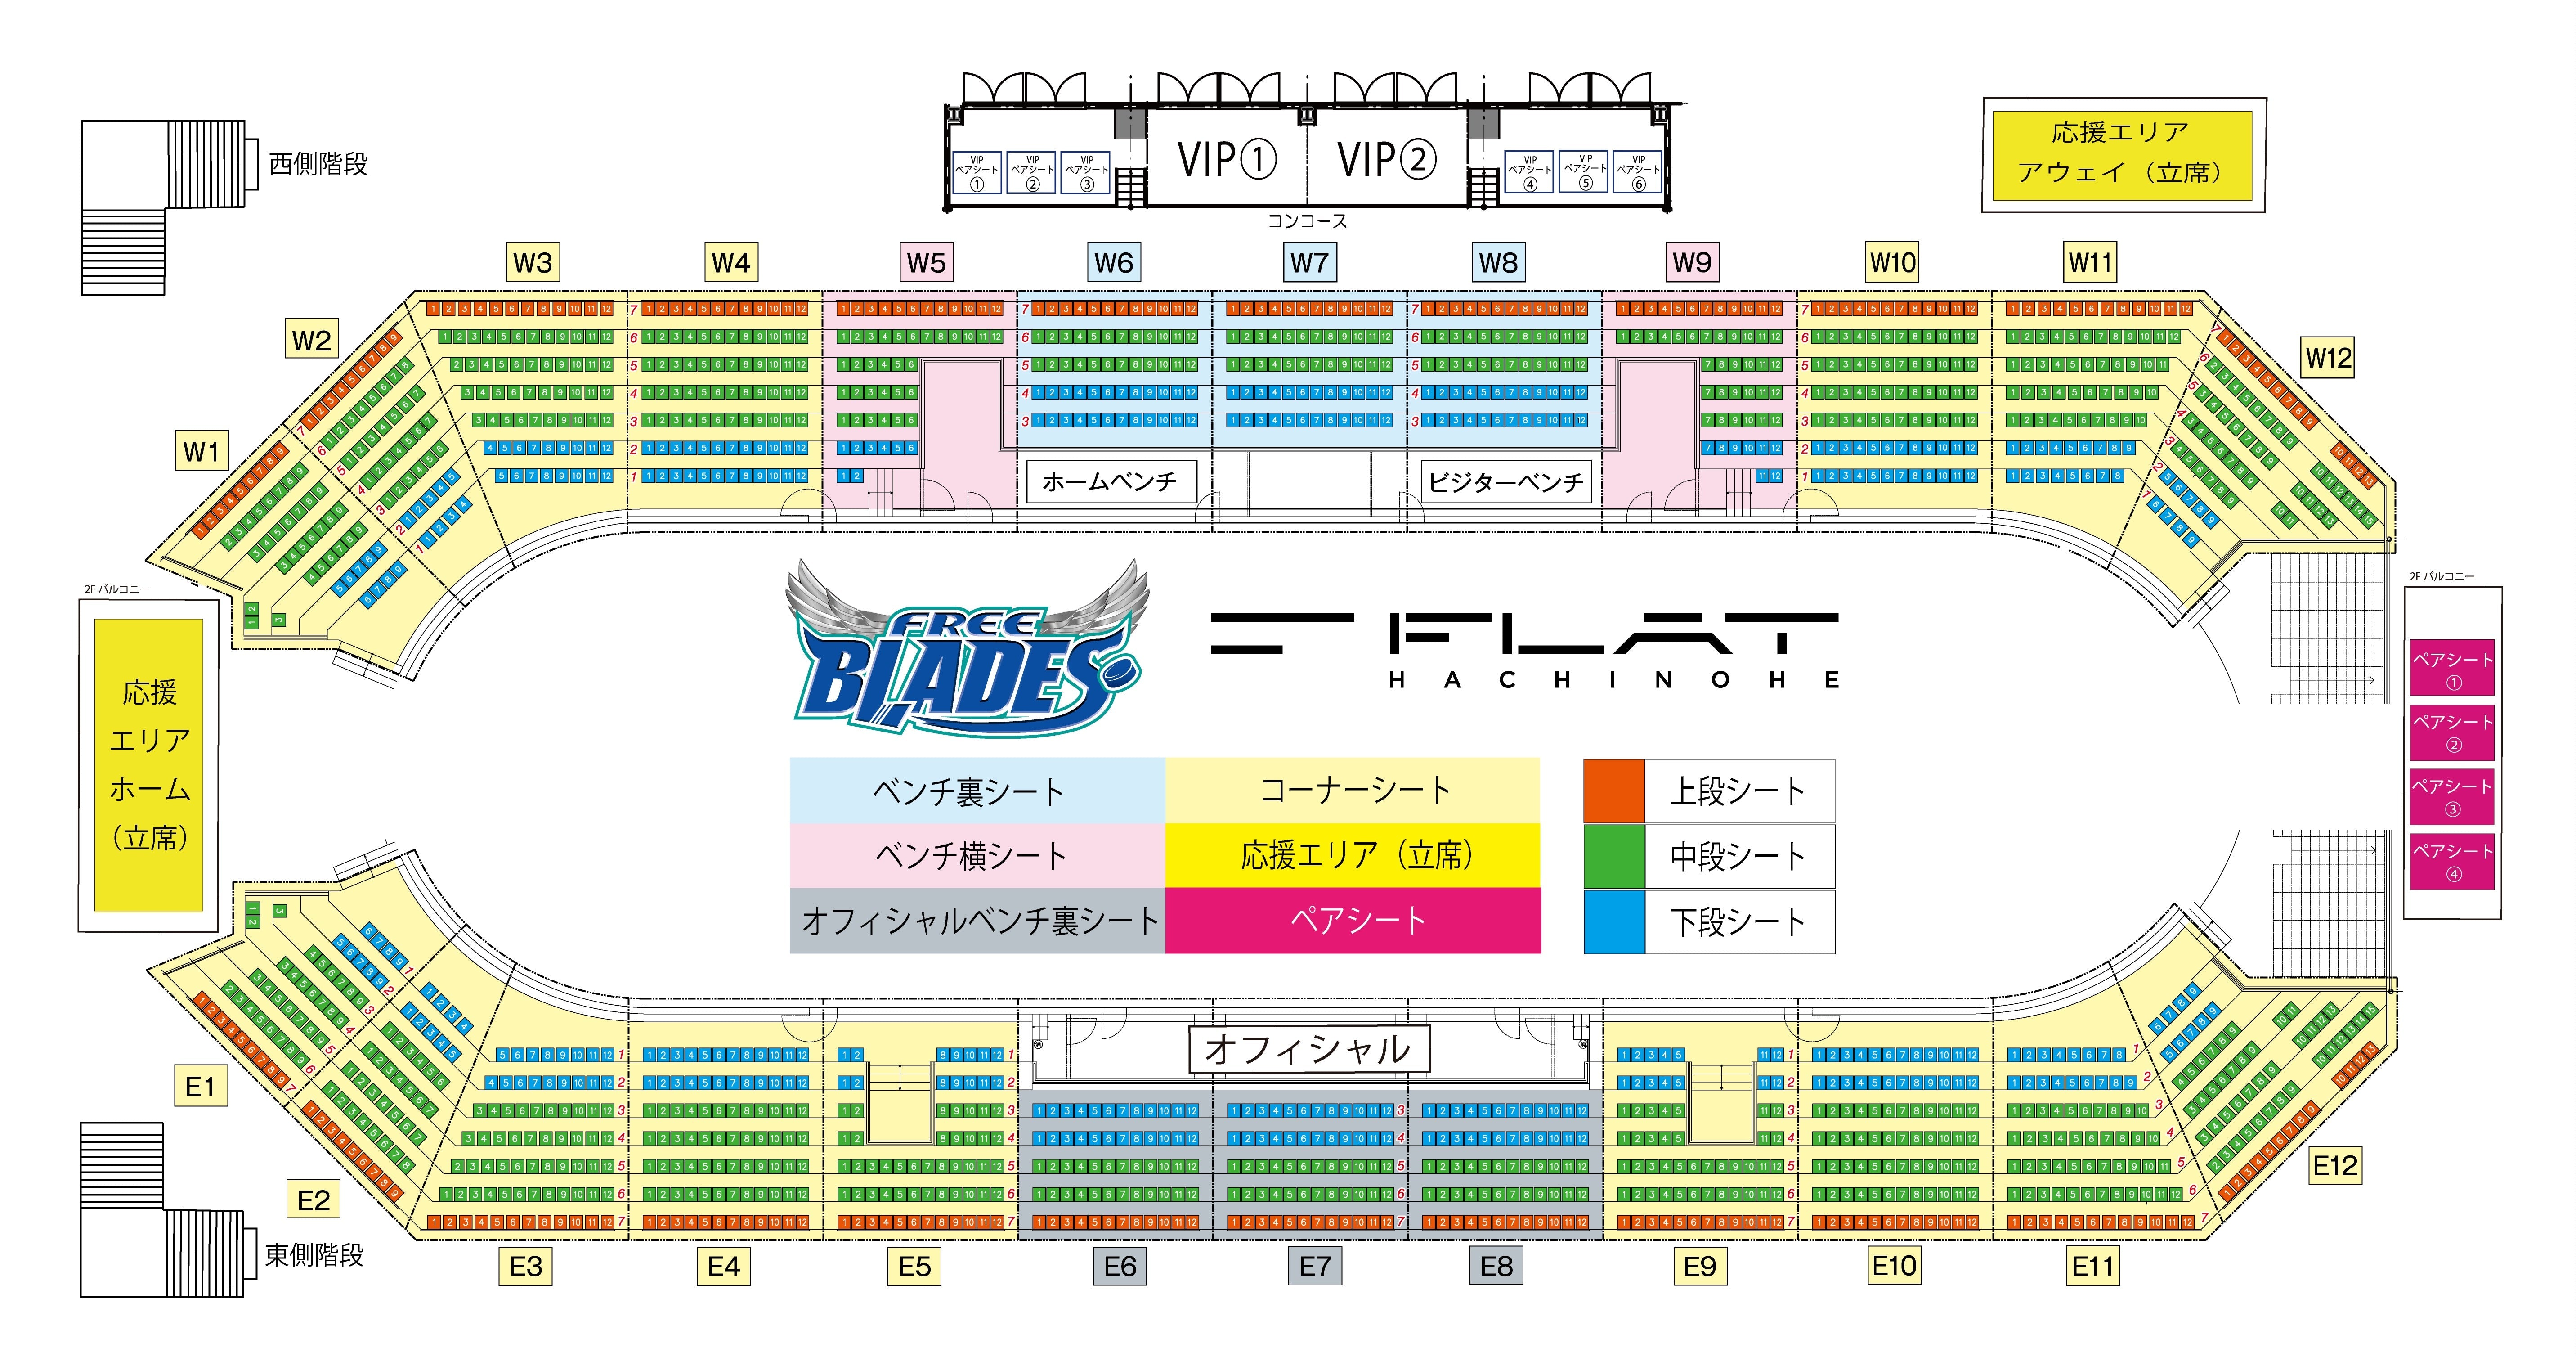 W5 / Bench side seat / 2023-24 Regular ticket March 9th (Sat) 17:00